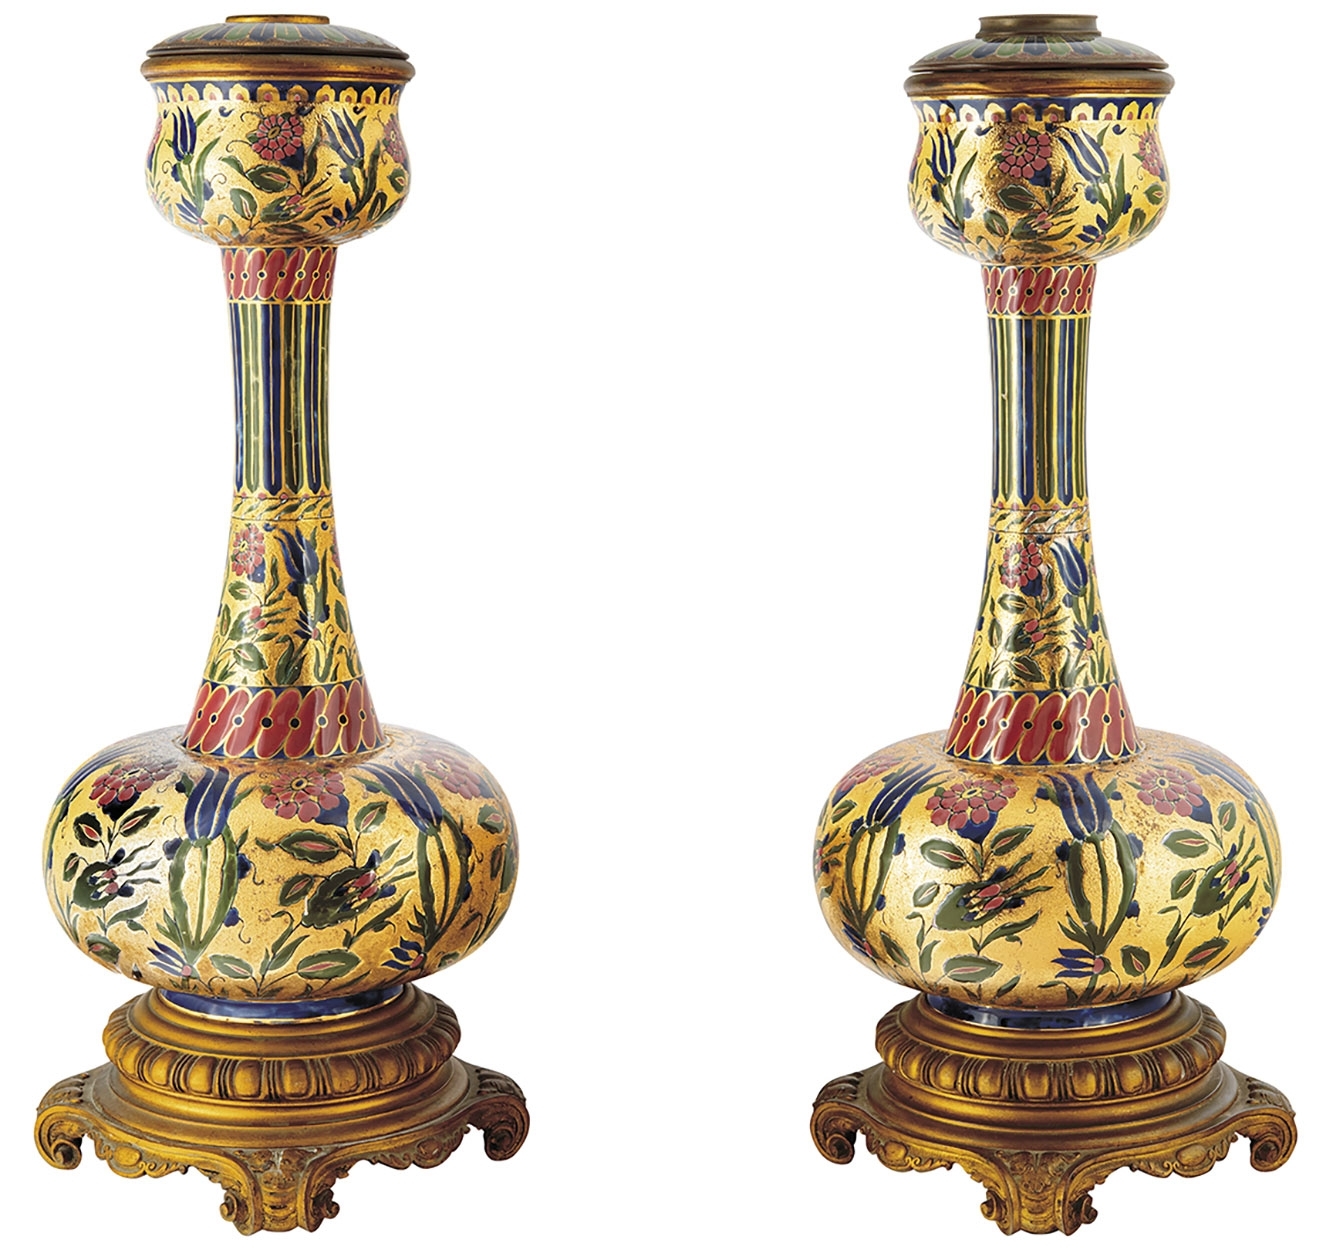 Zsolnay Oil-lamp pair of the „Persian” – series, Zsolnay, 1880s